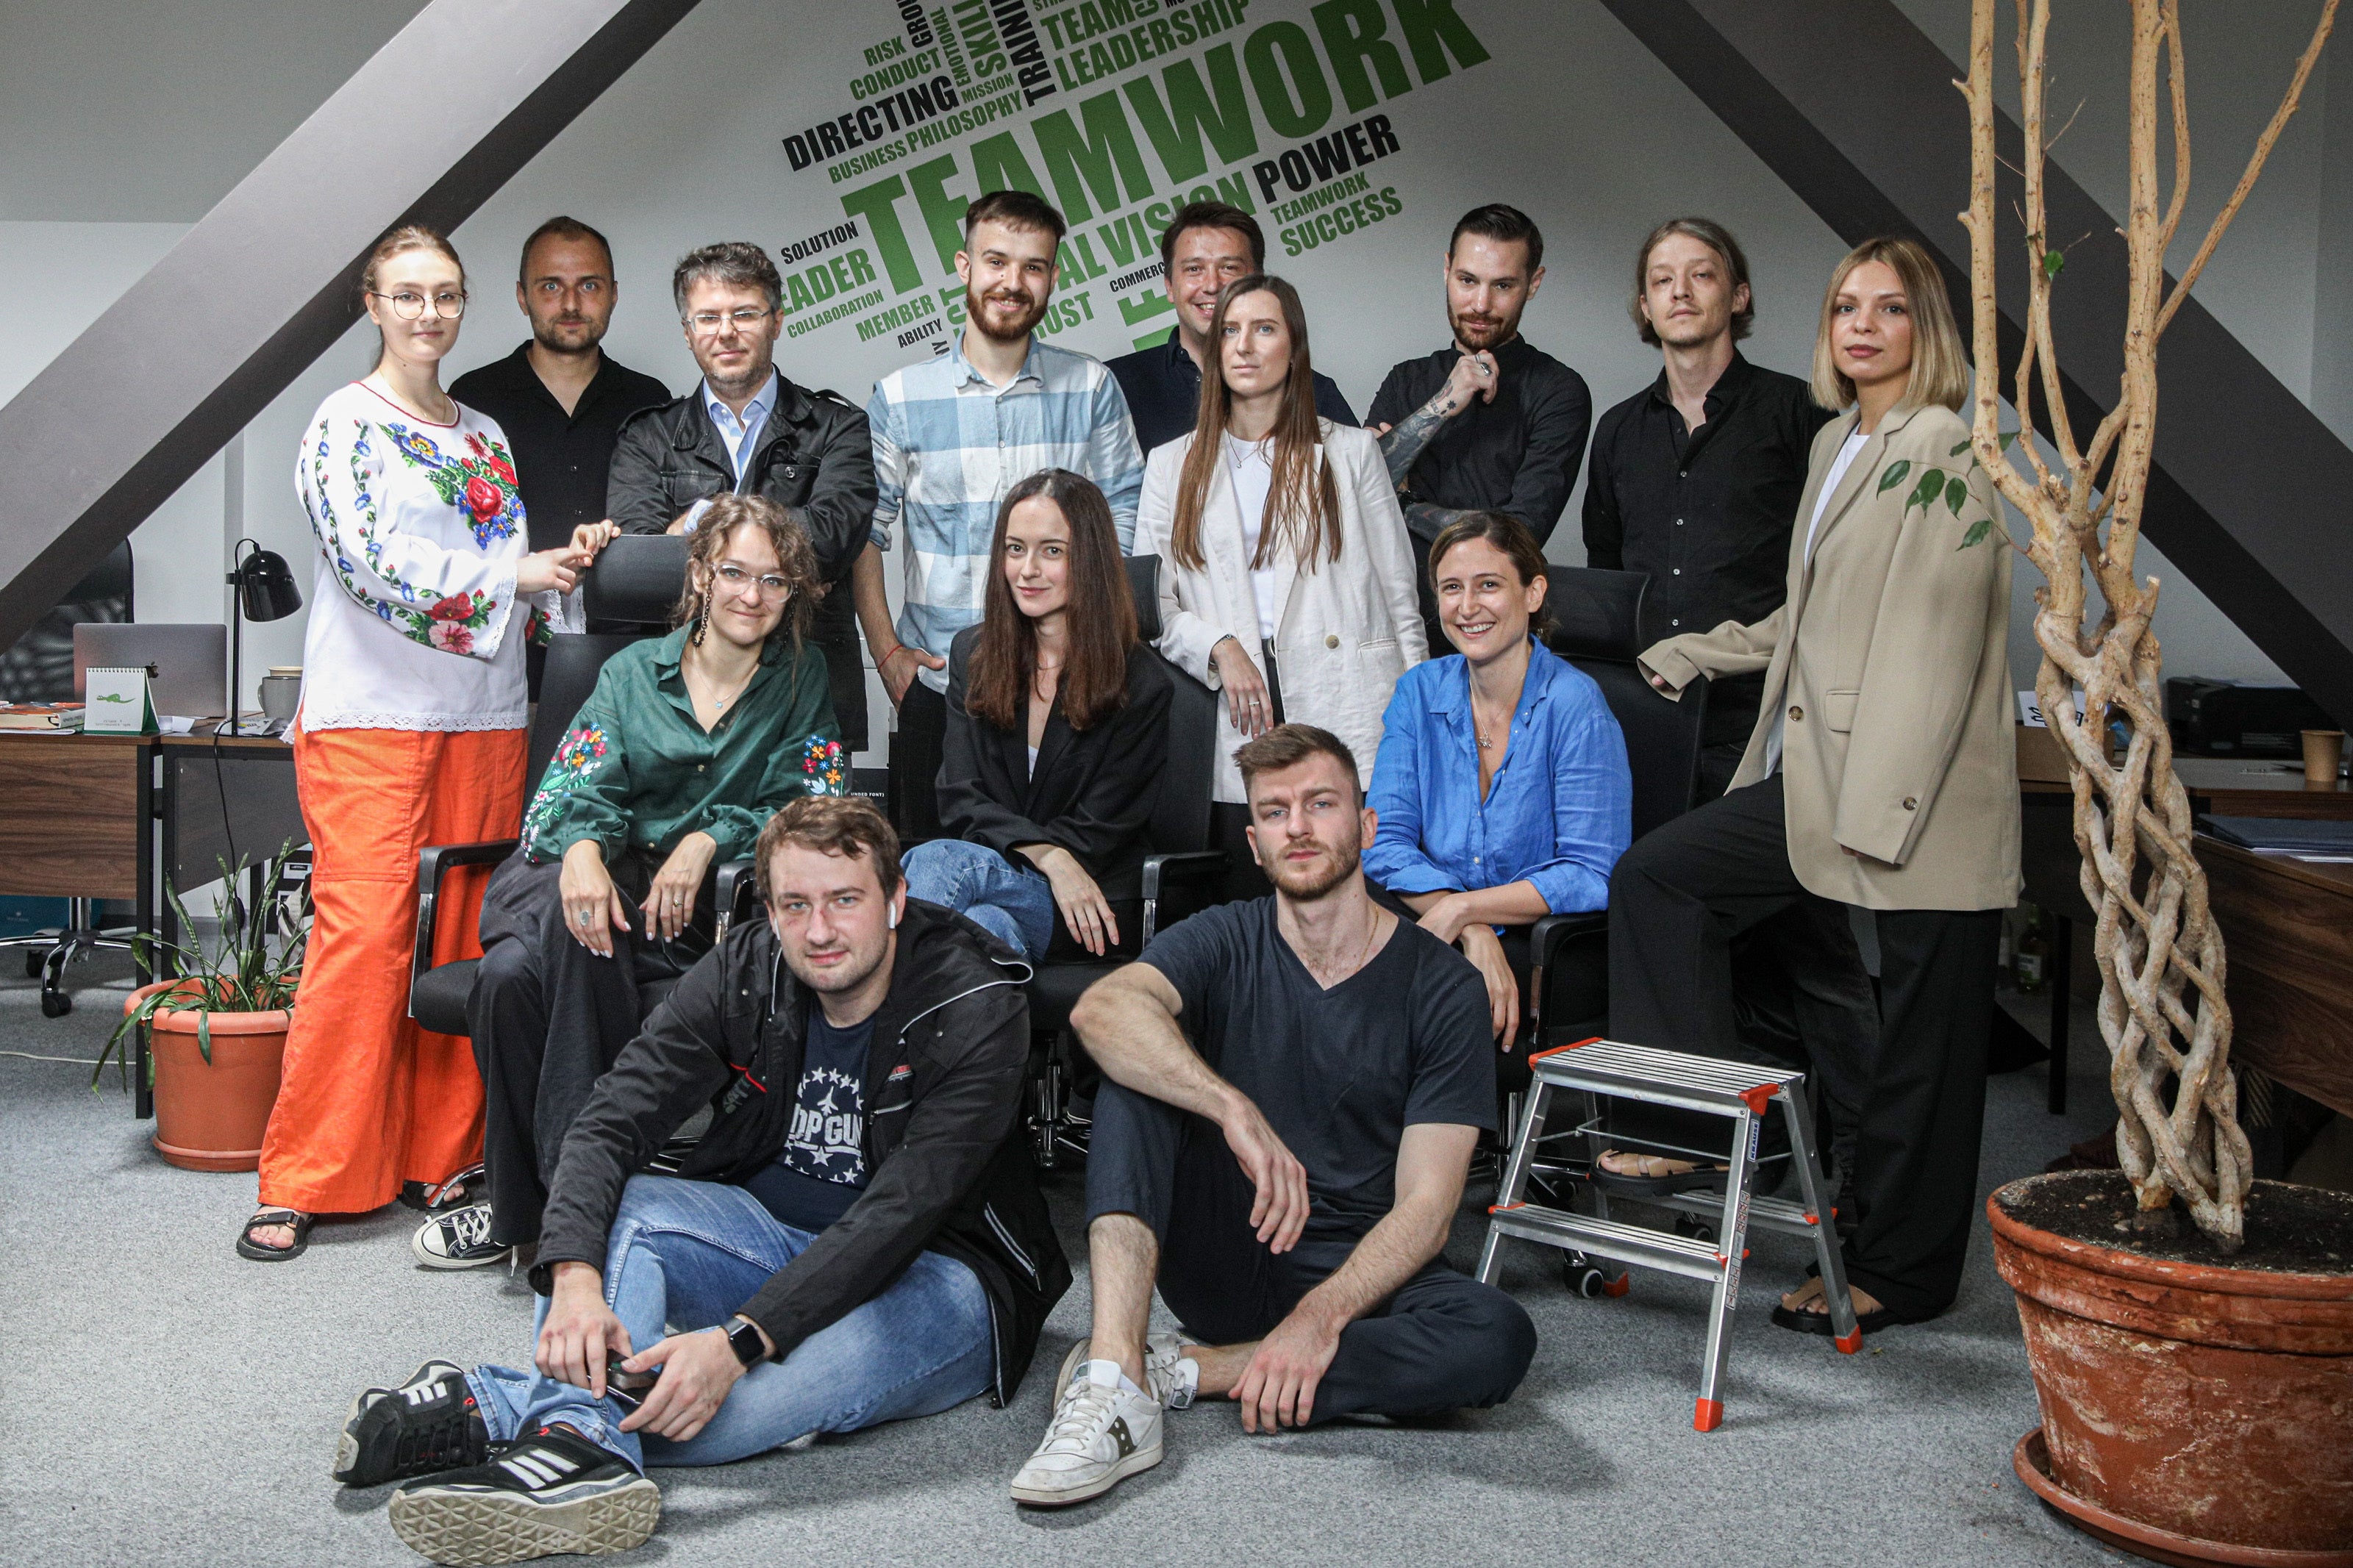 A group photo of the team in August when many had returned to the newsroom in Kyiv